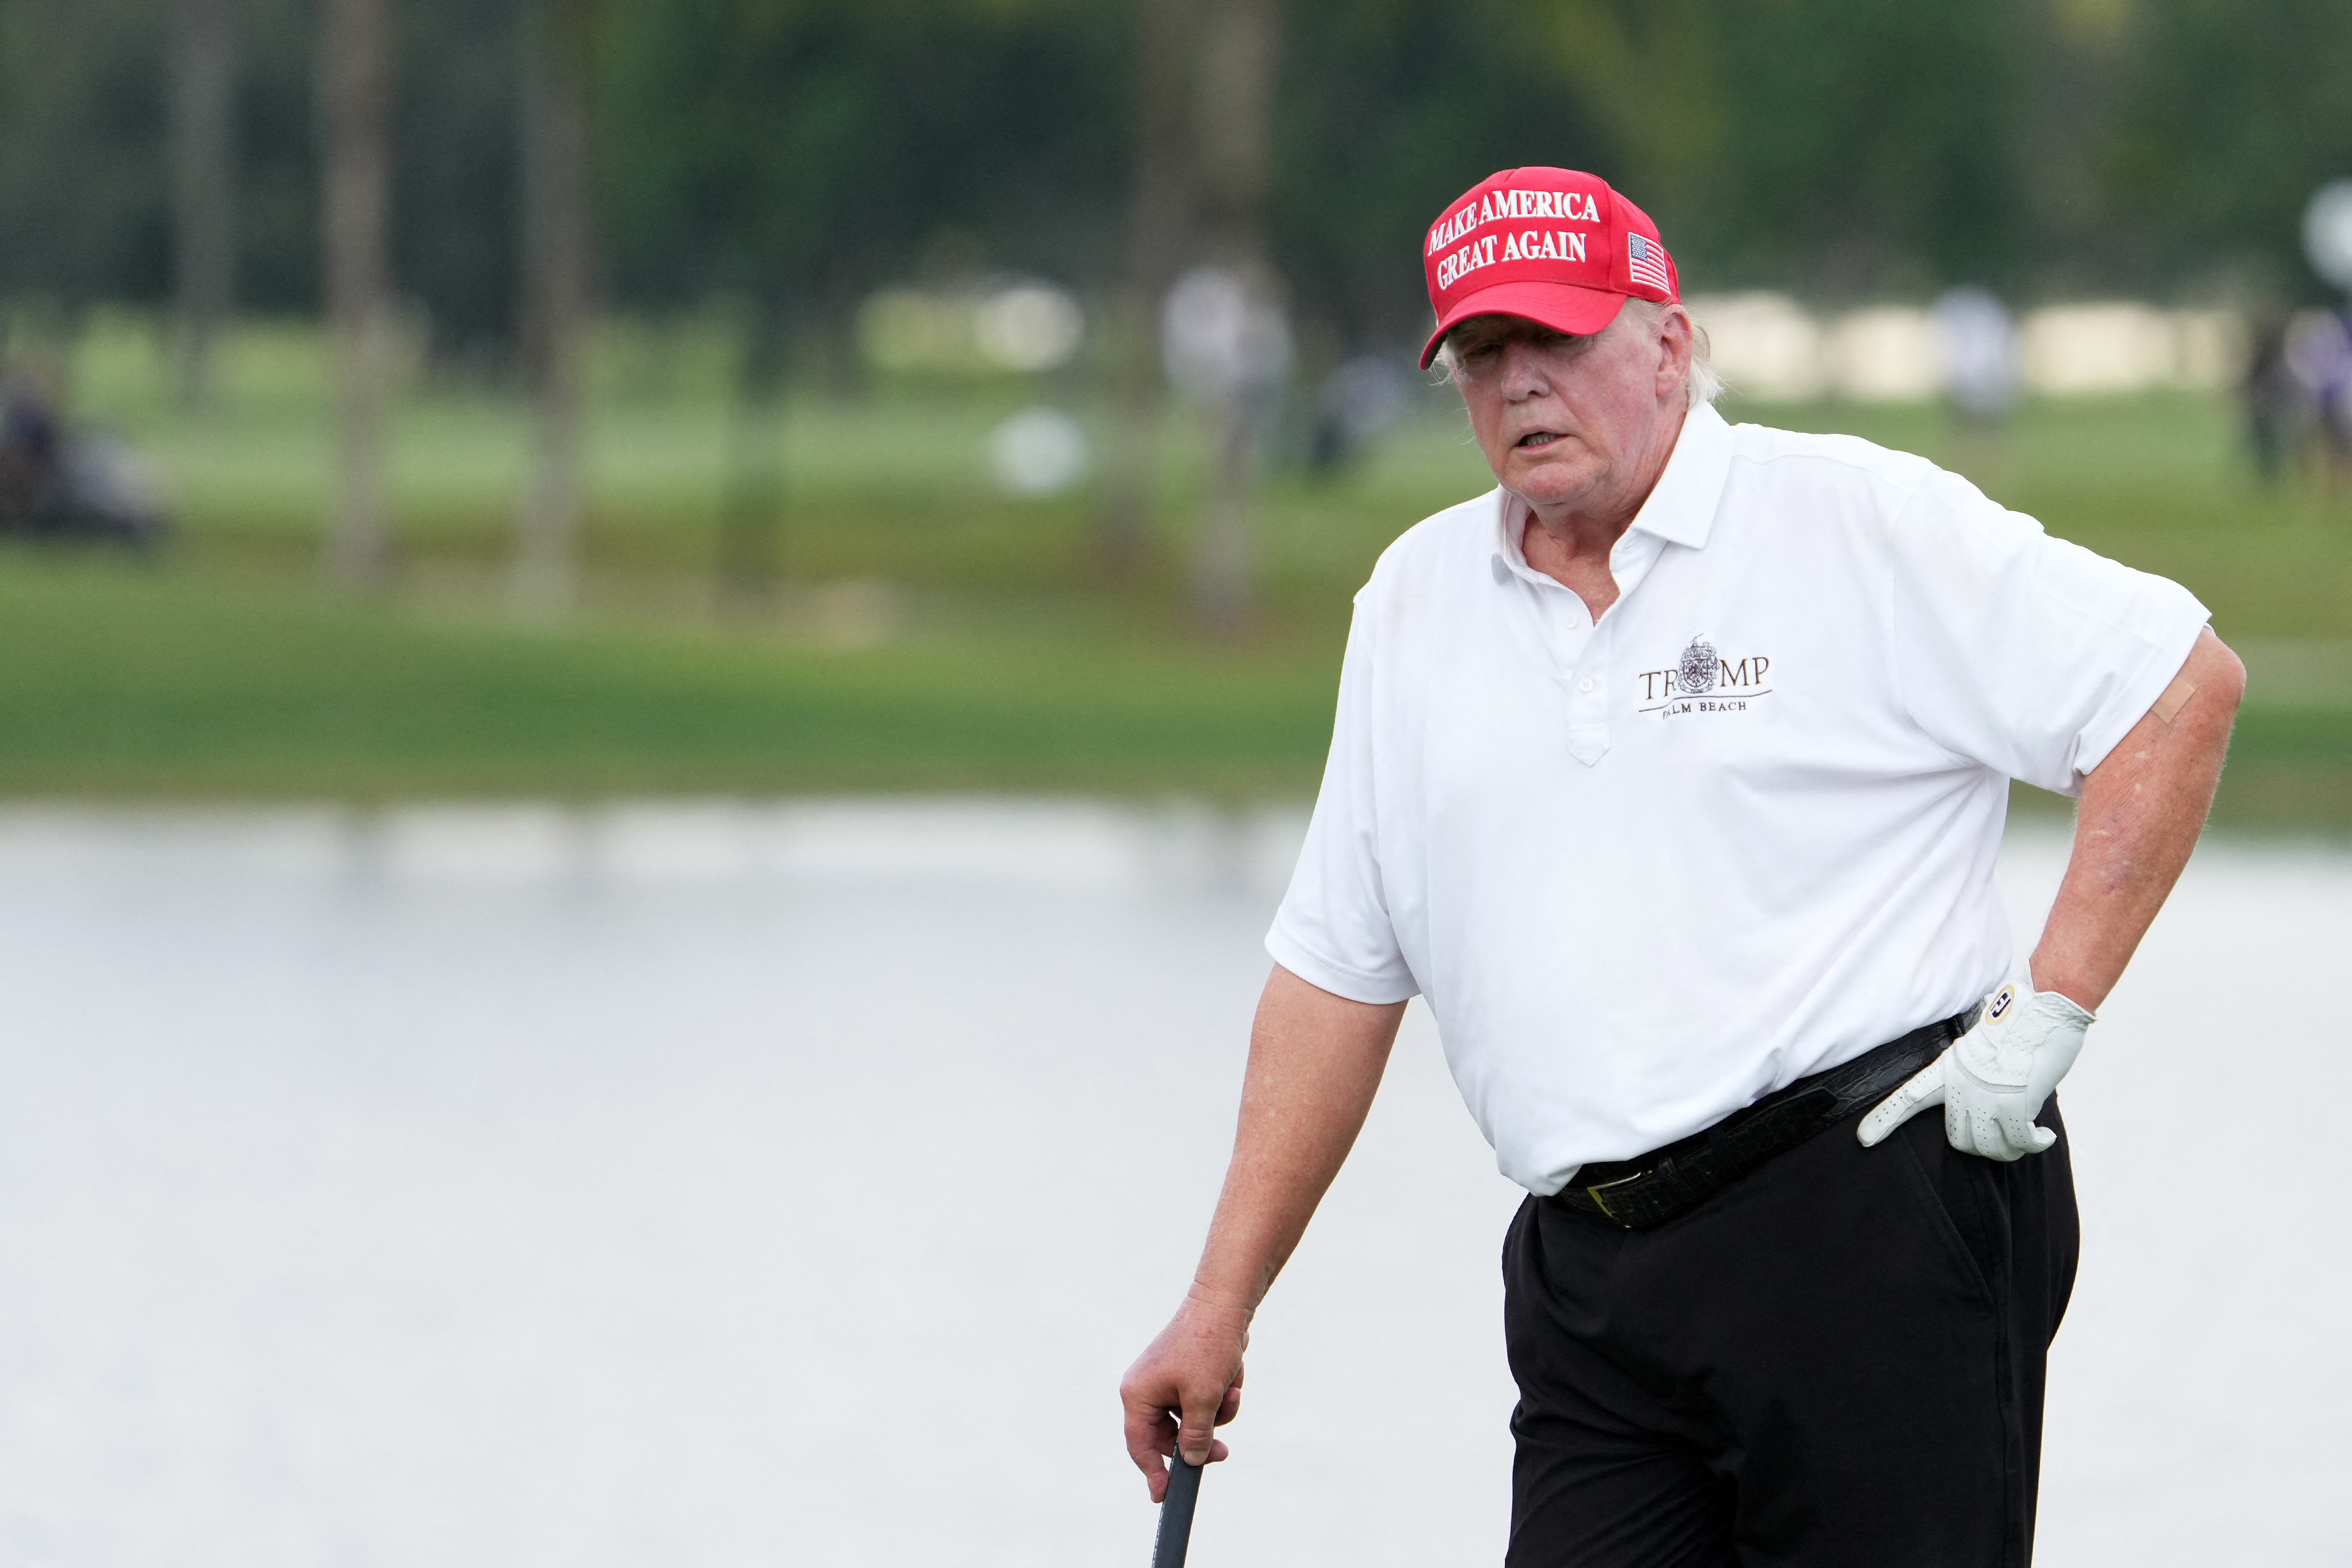 PGA Tour blew it by not making deal with LIV Golf, says Trump